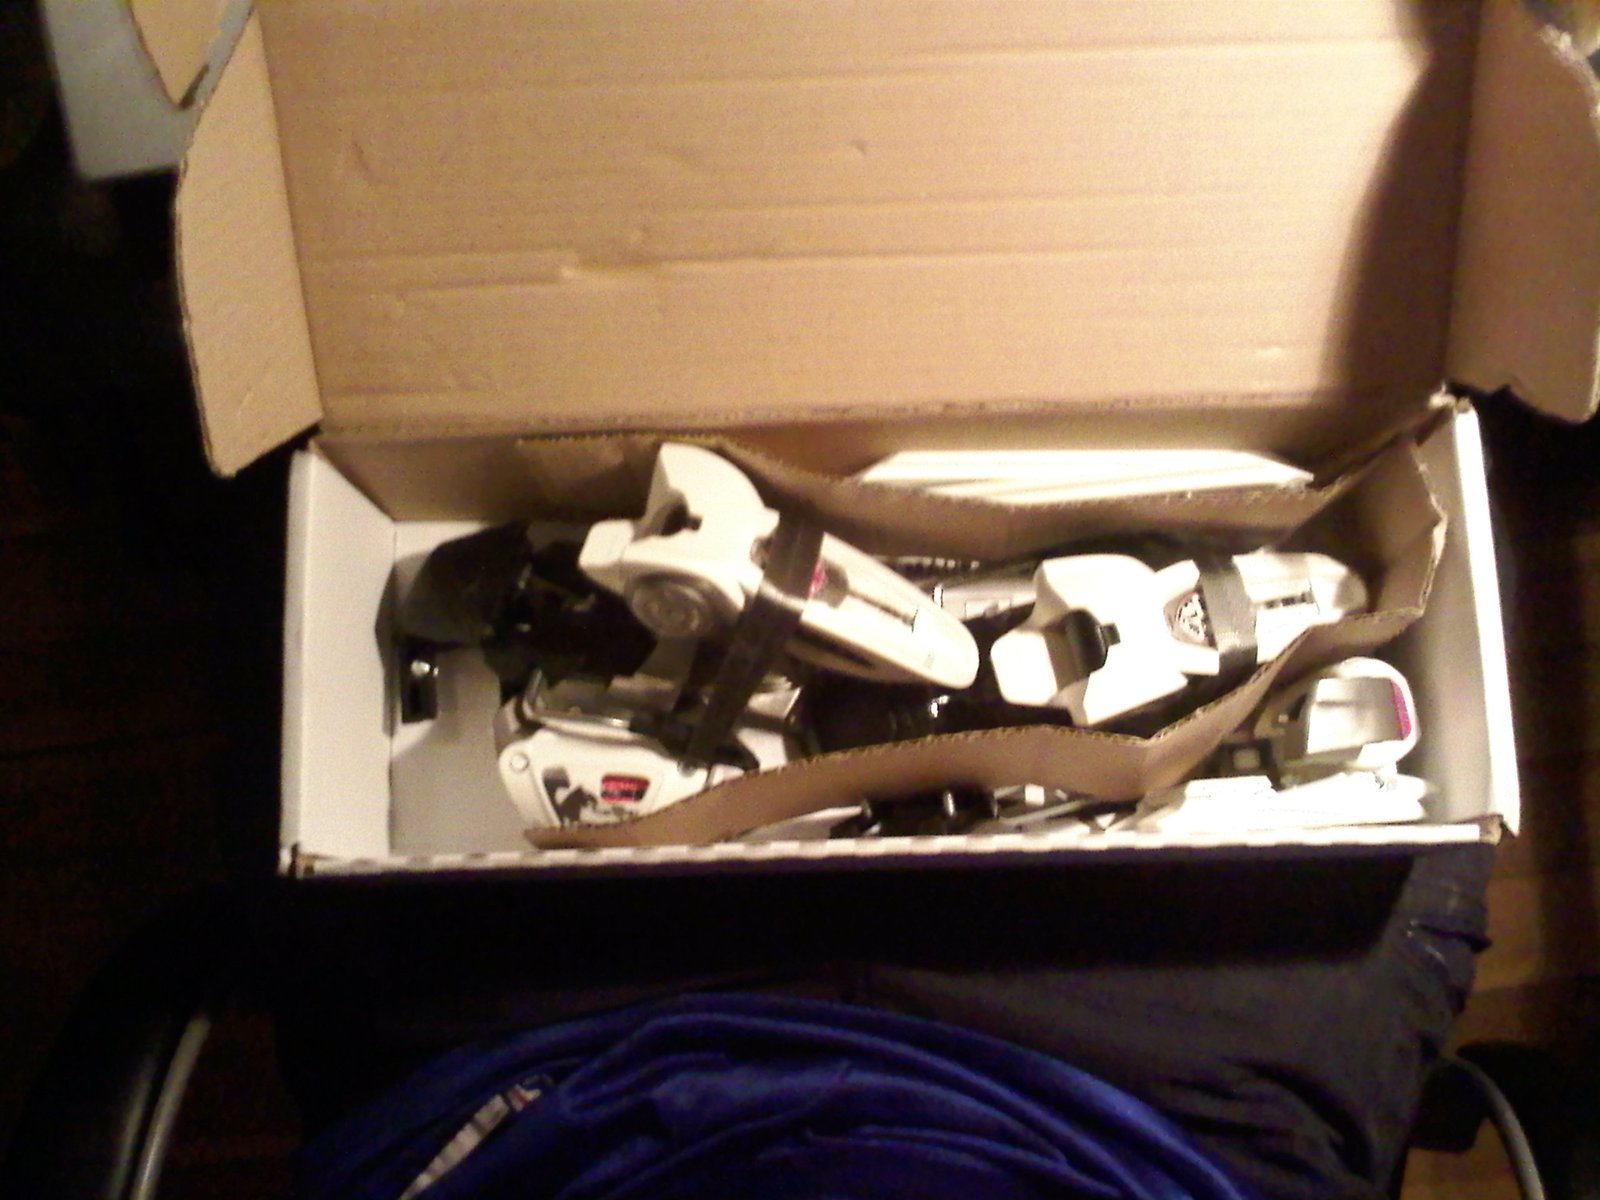 Brand New '10/'11 Marker Griffon Bindings! Two Pairs, Wide brakes... in box!